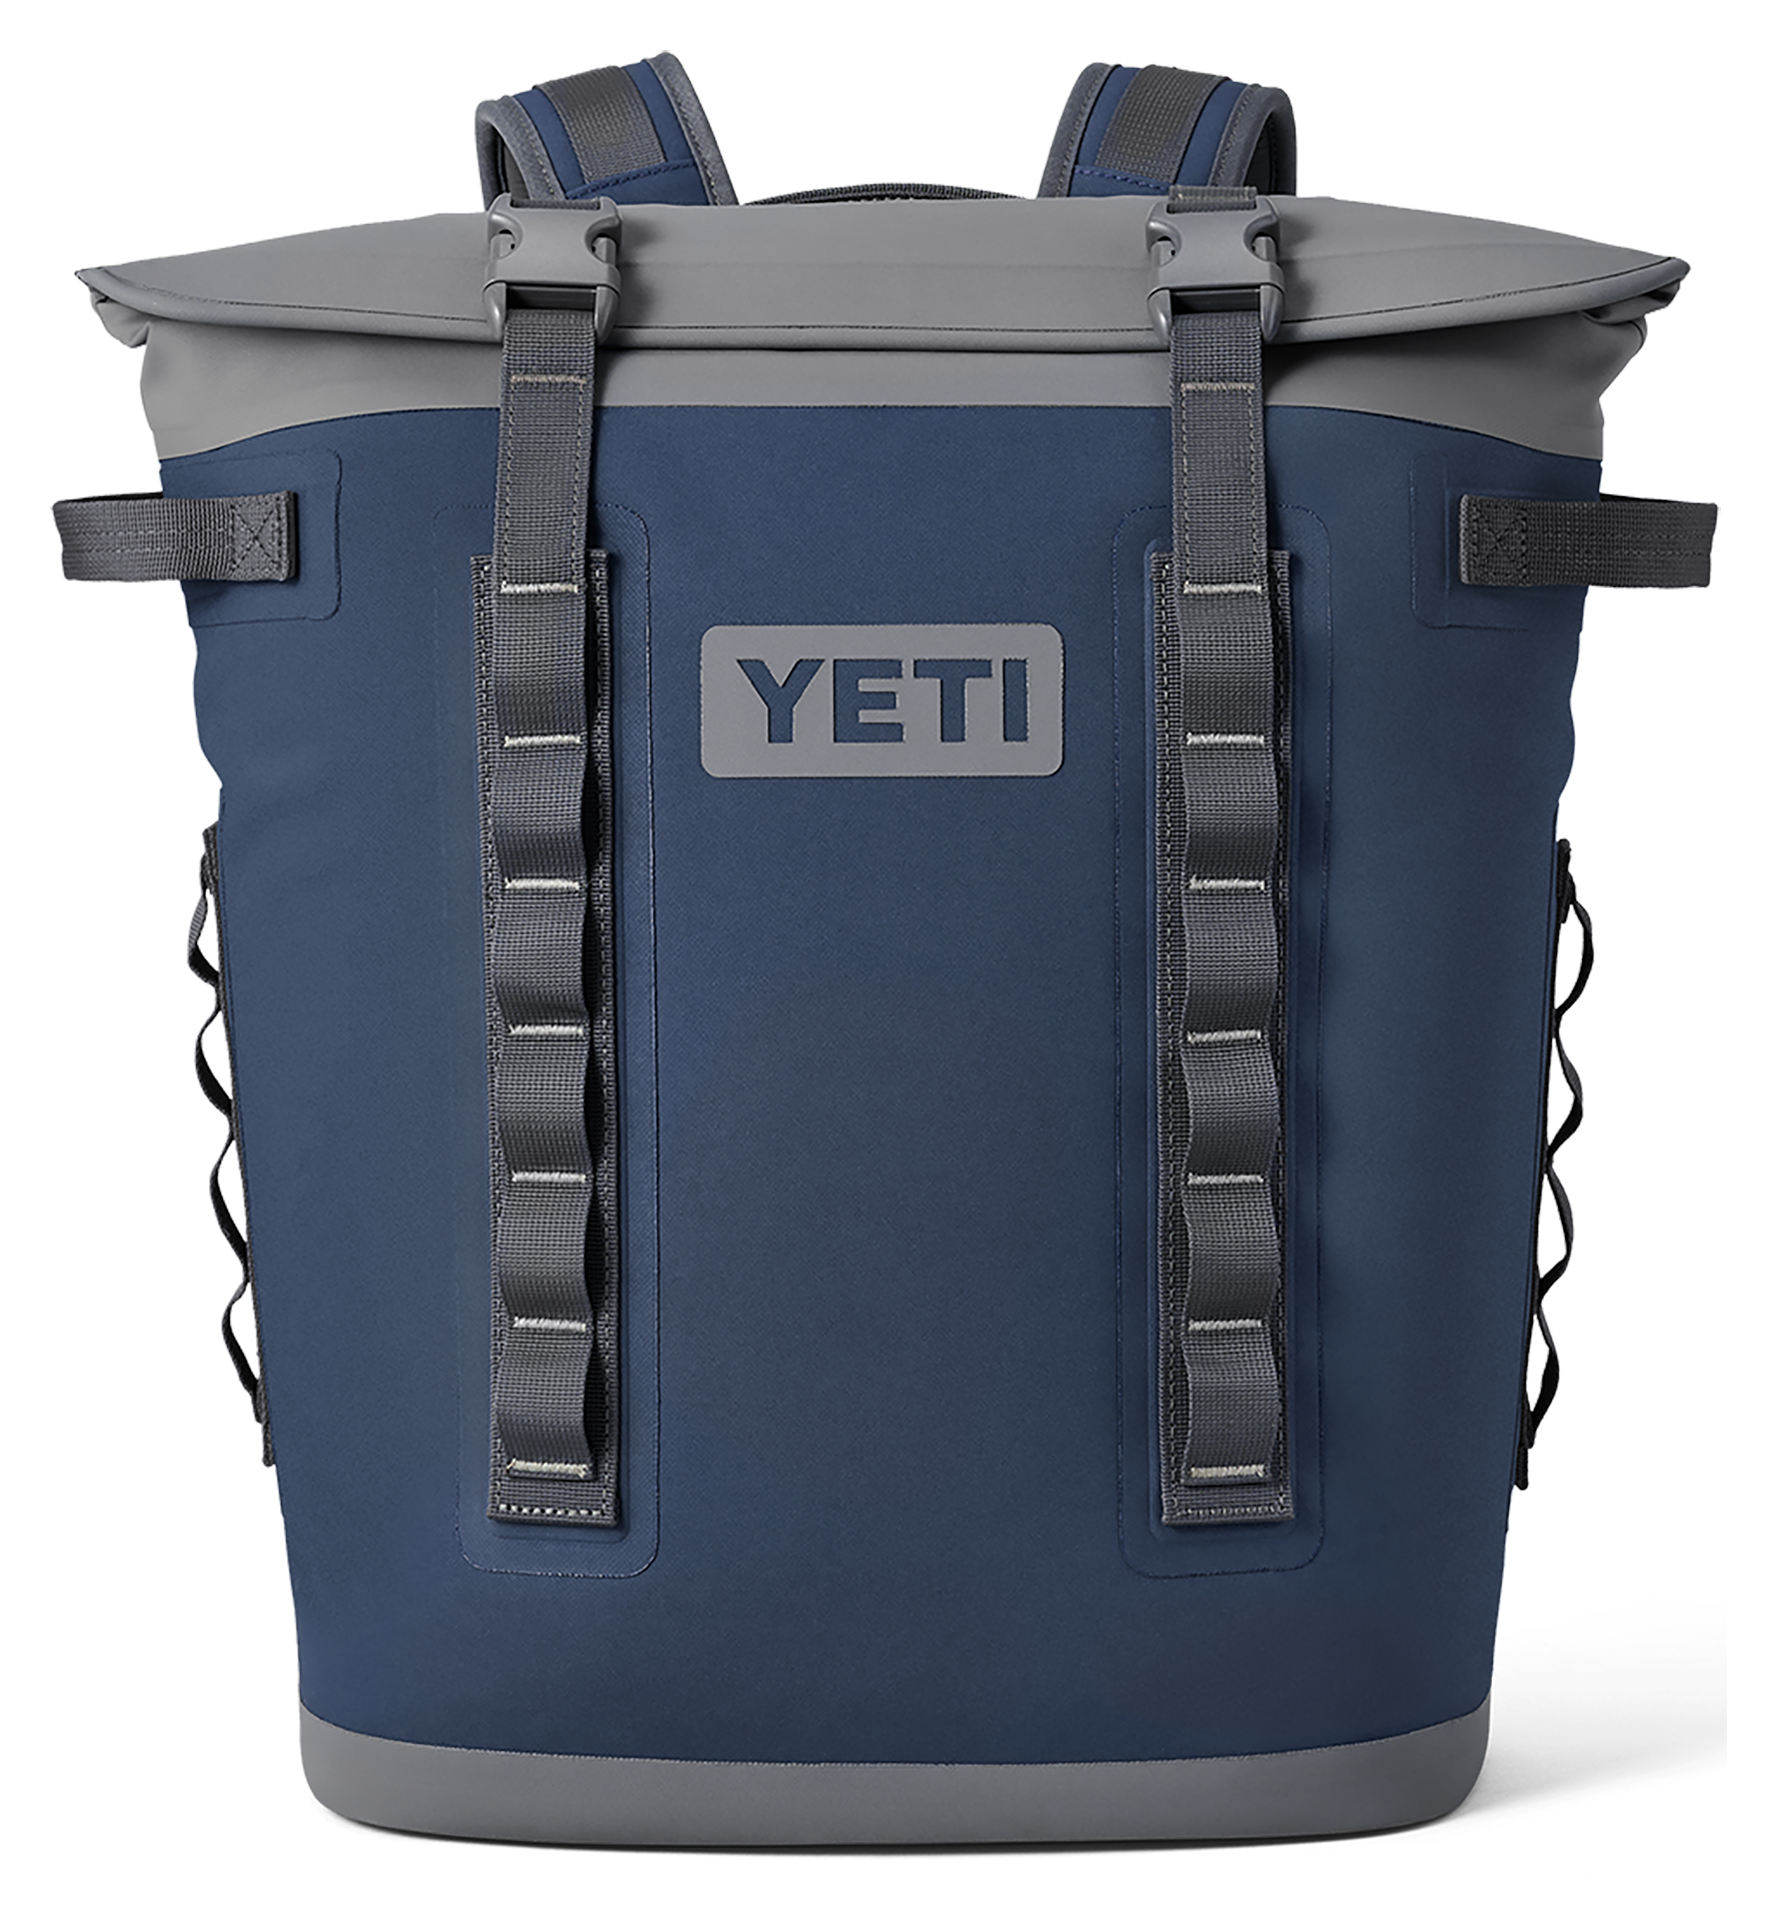 YETI Hopper M20 Backpack Cooler - Navy - 36 Cans